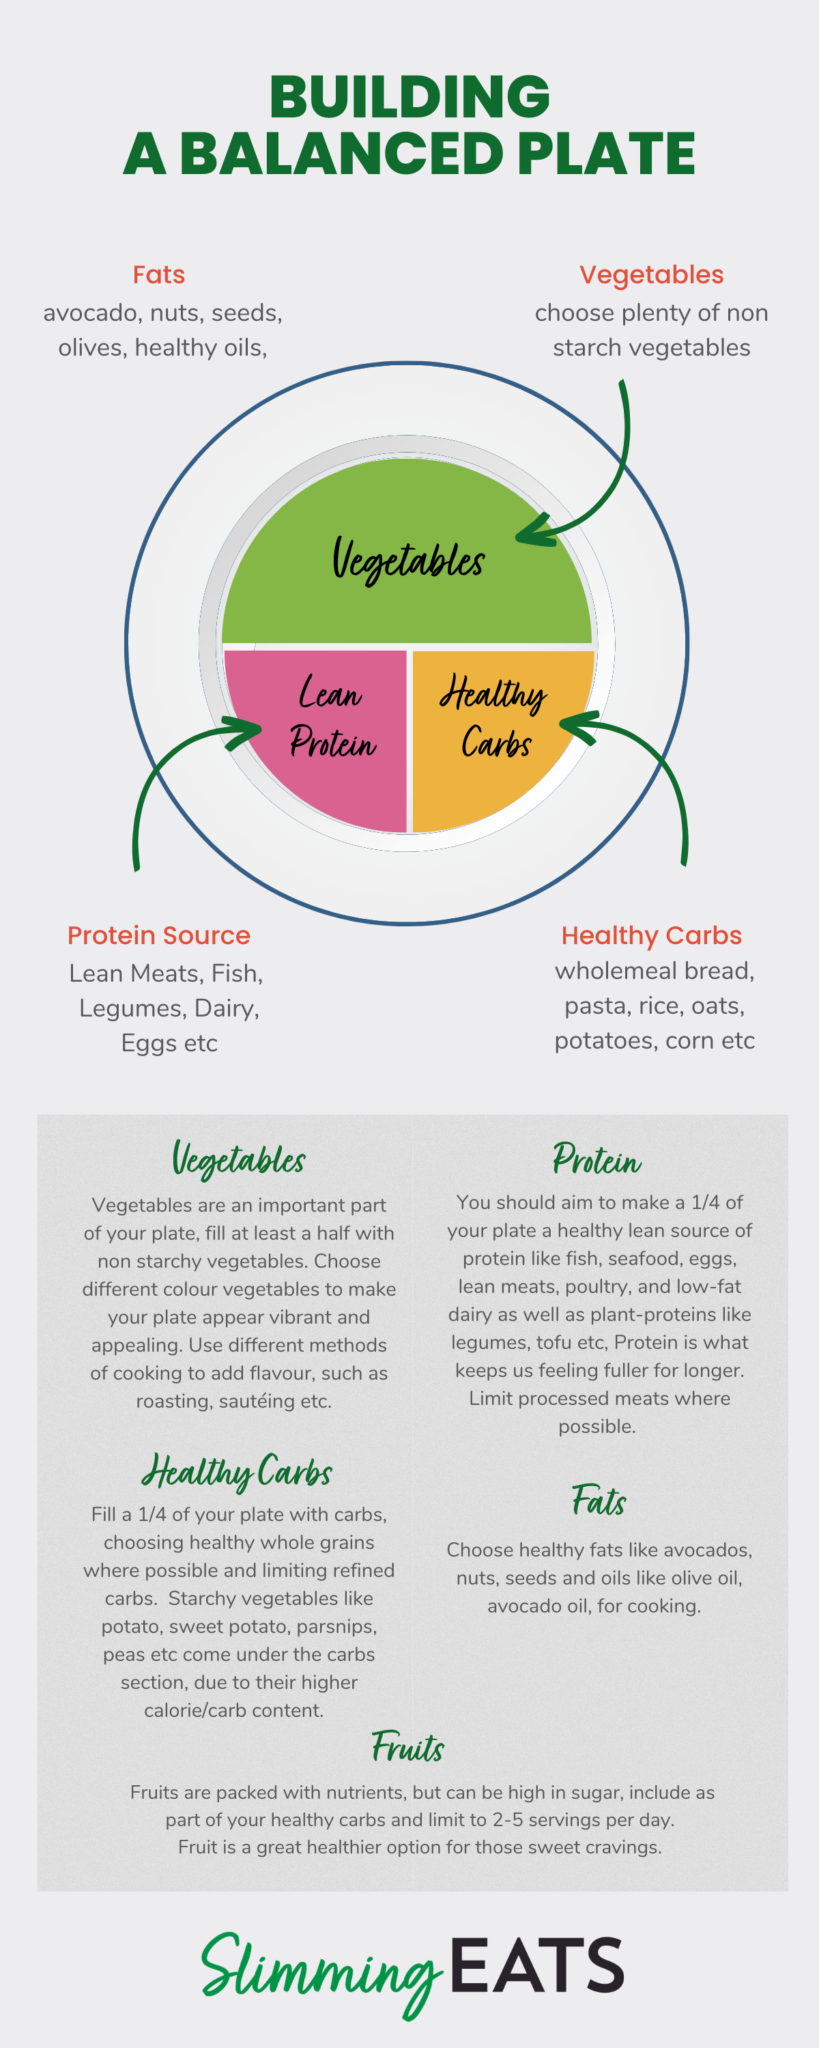 Tips for Healthy Eating and Natural Portion Control infographic